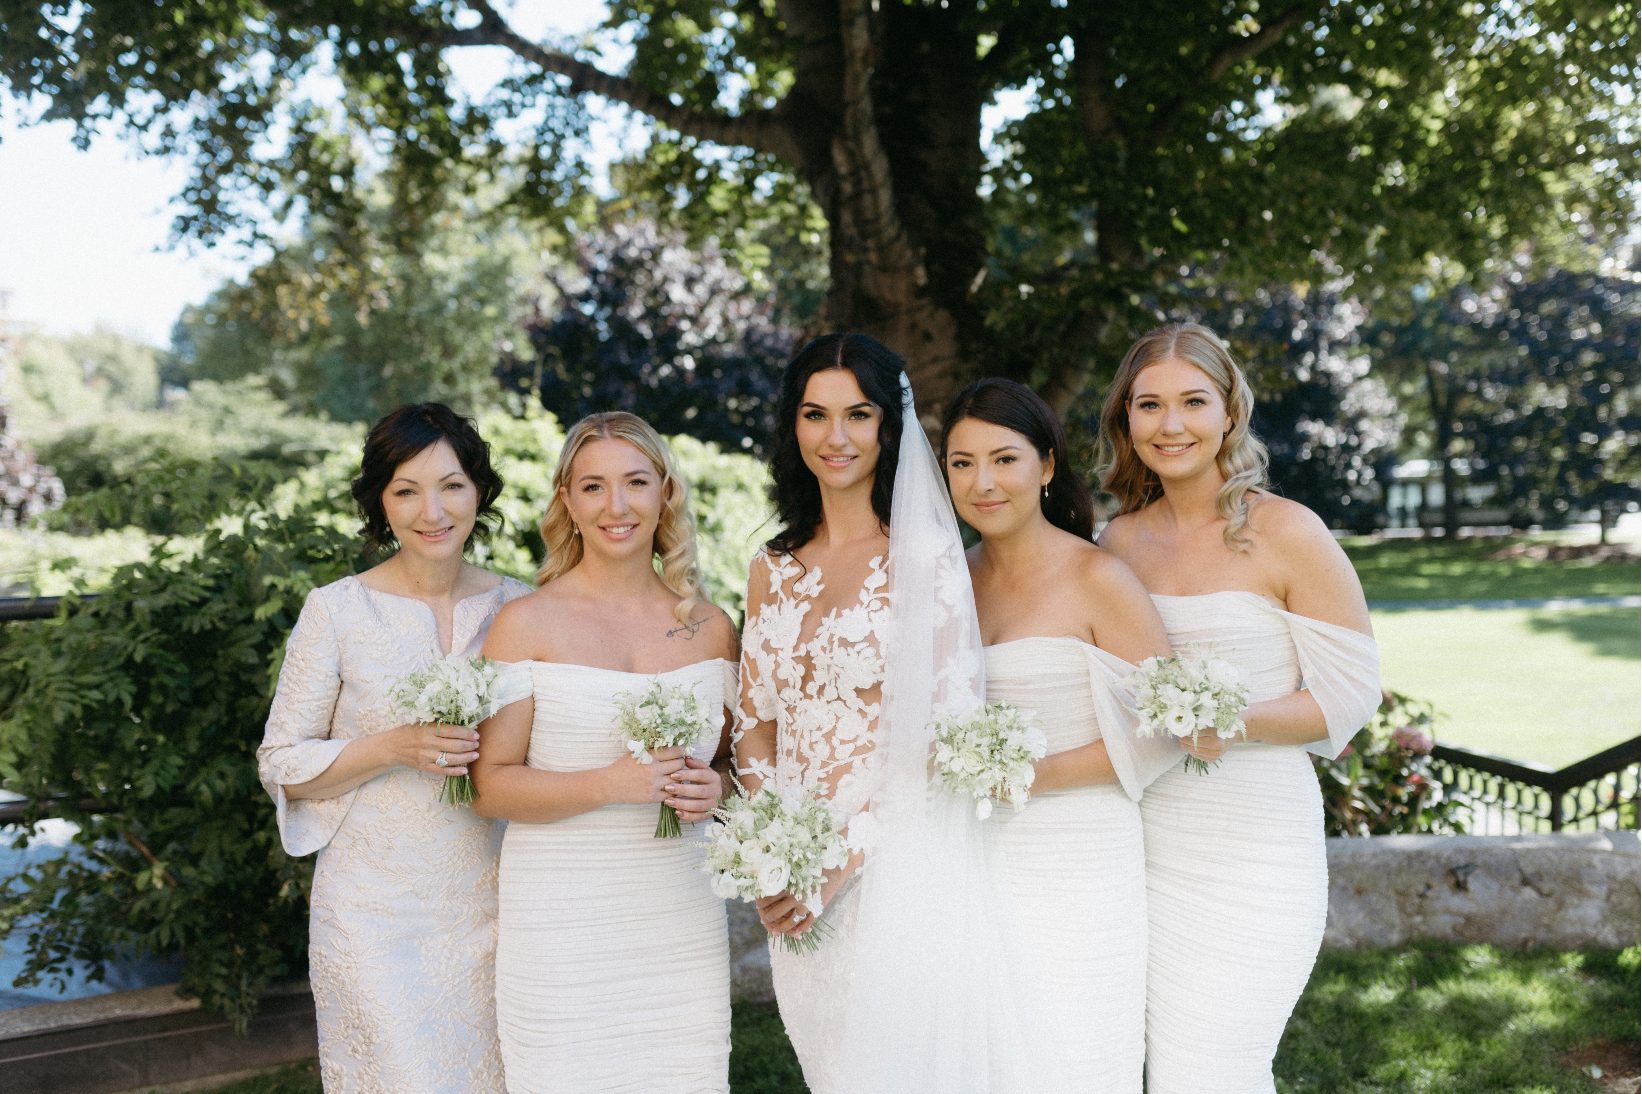 Stephanie and her bridesmaids all stand in the gardens wearing white, and holding white posy bouquets